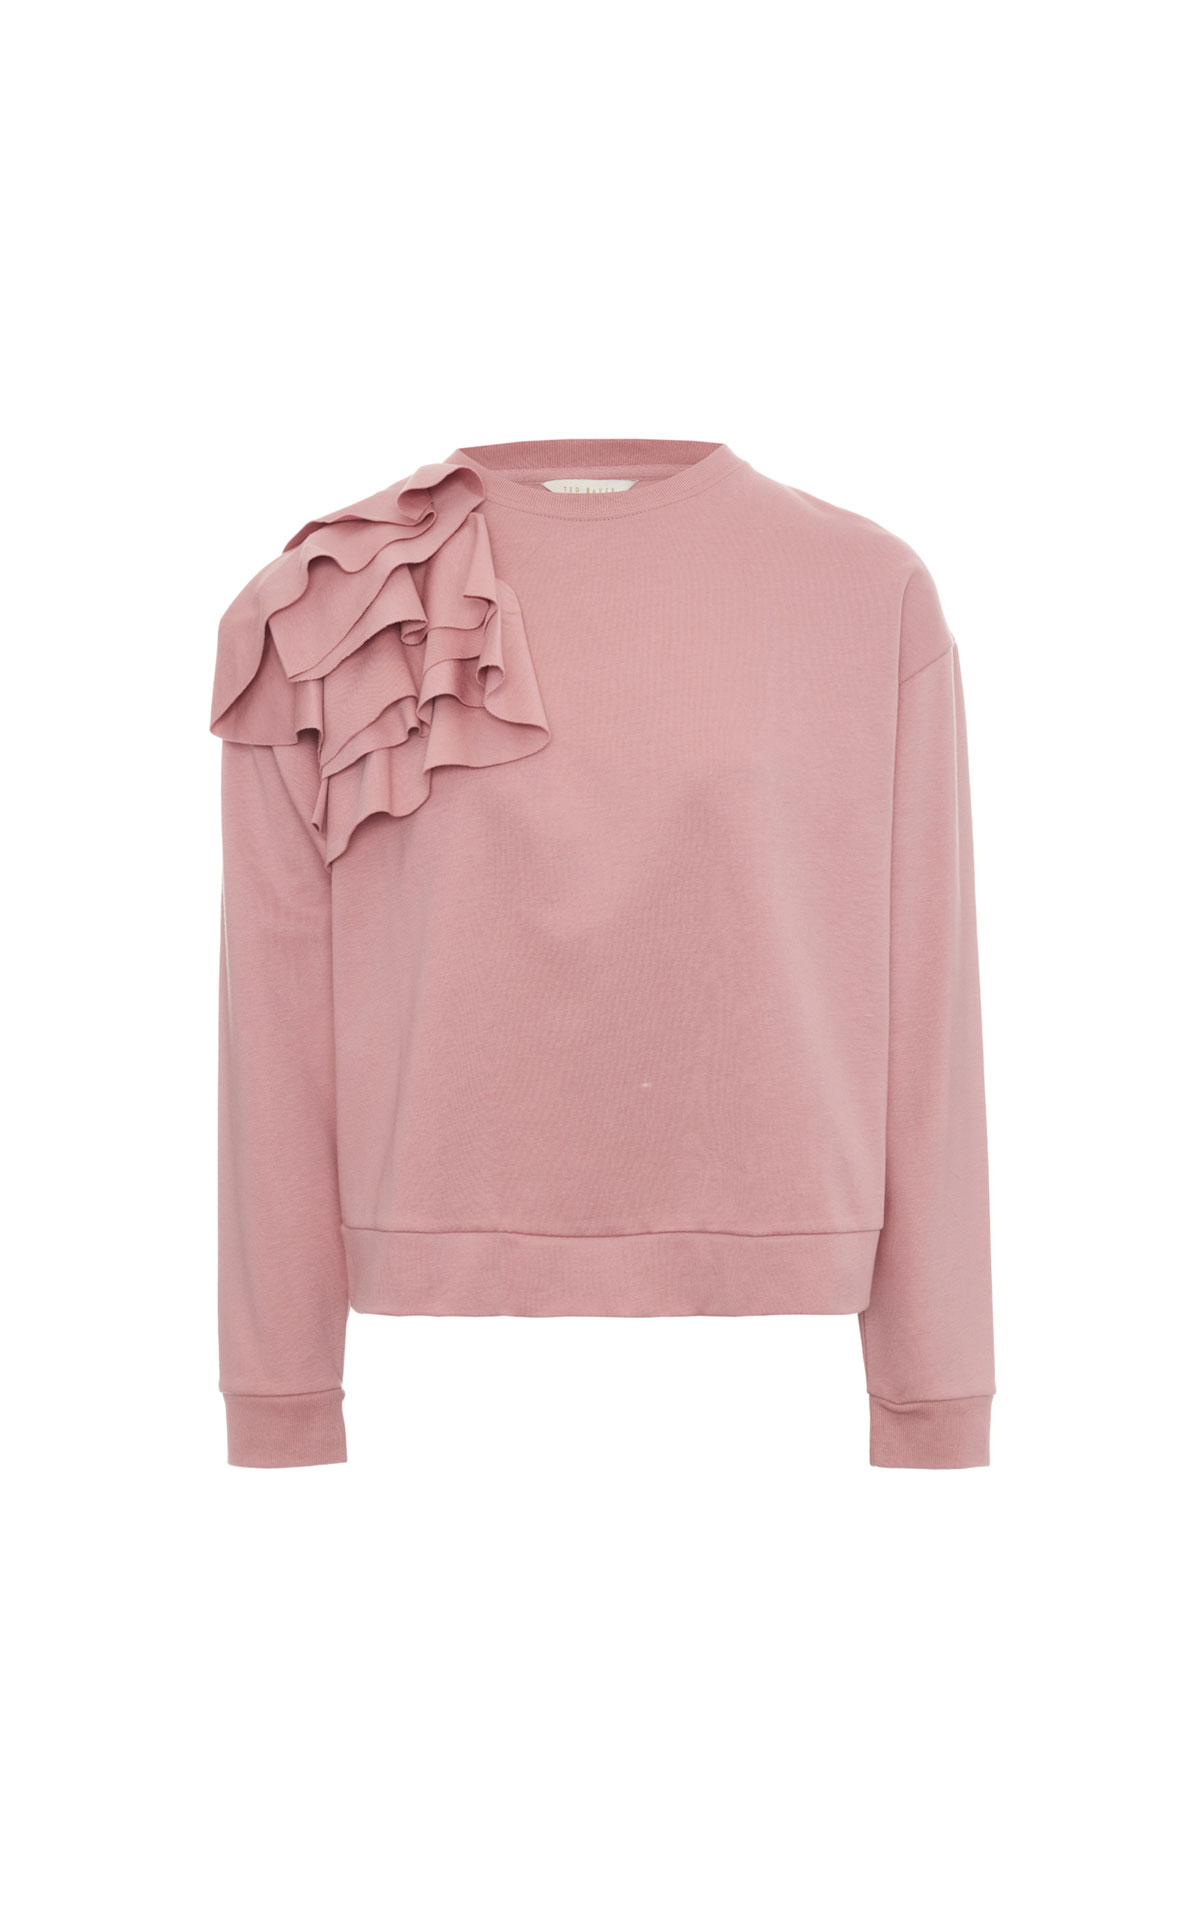 Ted Baker Sweatshirt with ruffles from Bicester Village